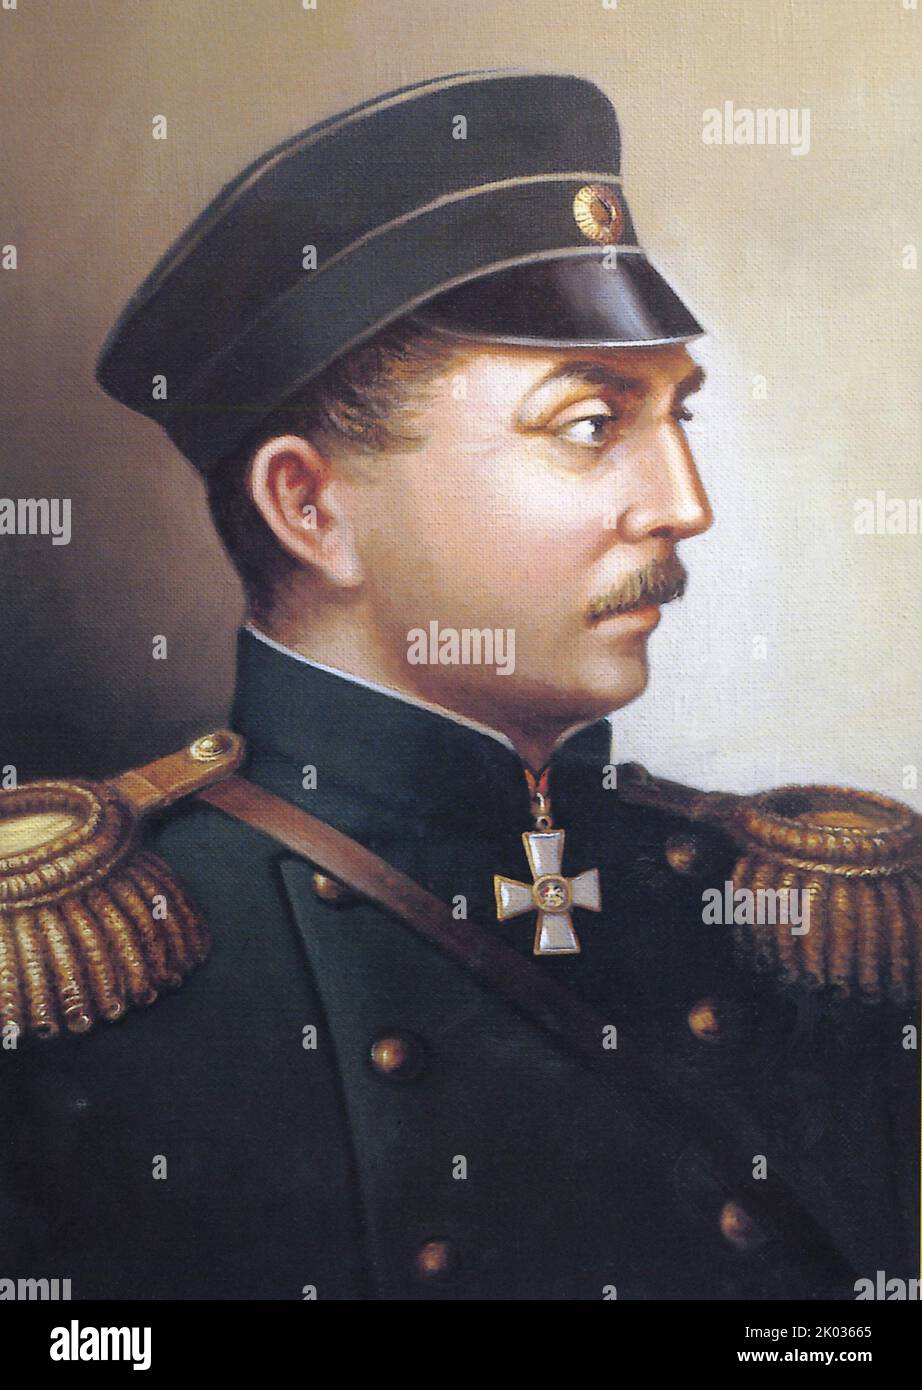 Pavel Stepanovich Nakhimov (1802 - 1855), Russian admiral, remembered as the commander of naval and land forces during the Siege of Sevastopol (1854-1855) during the Crimean War. Stock Photo